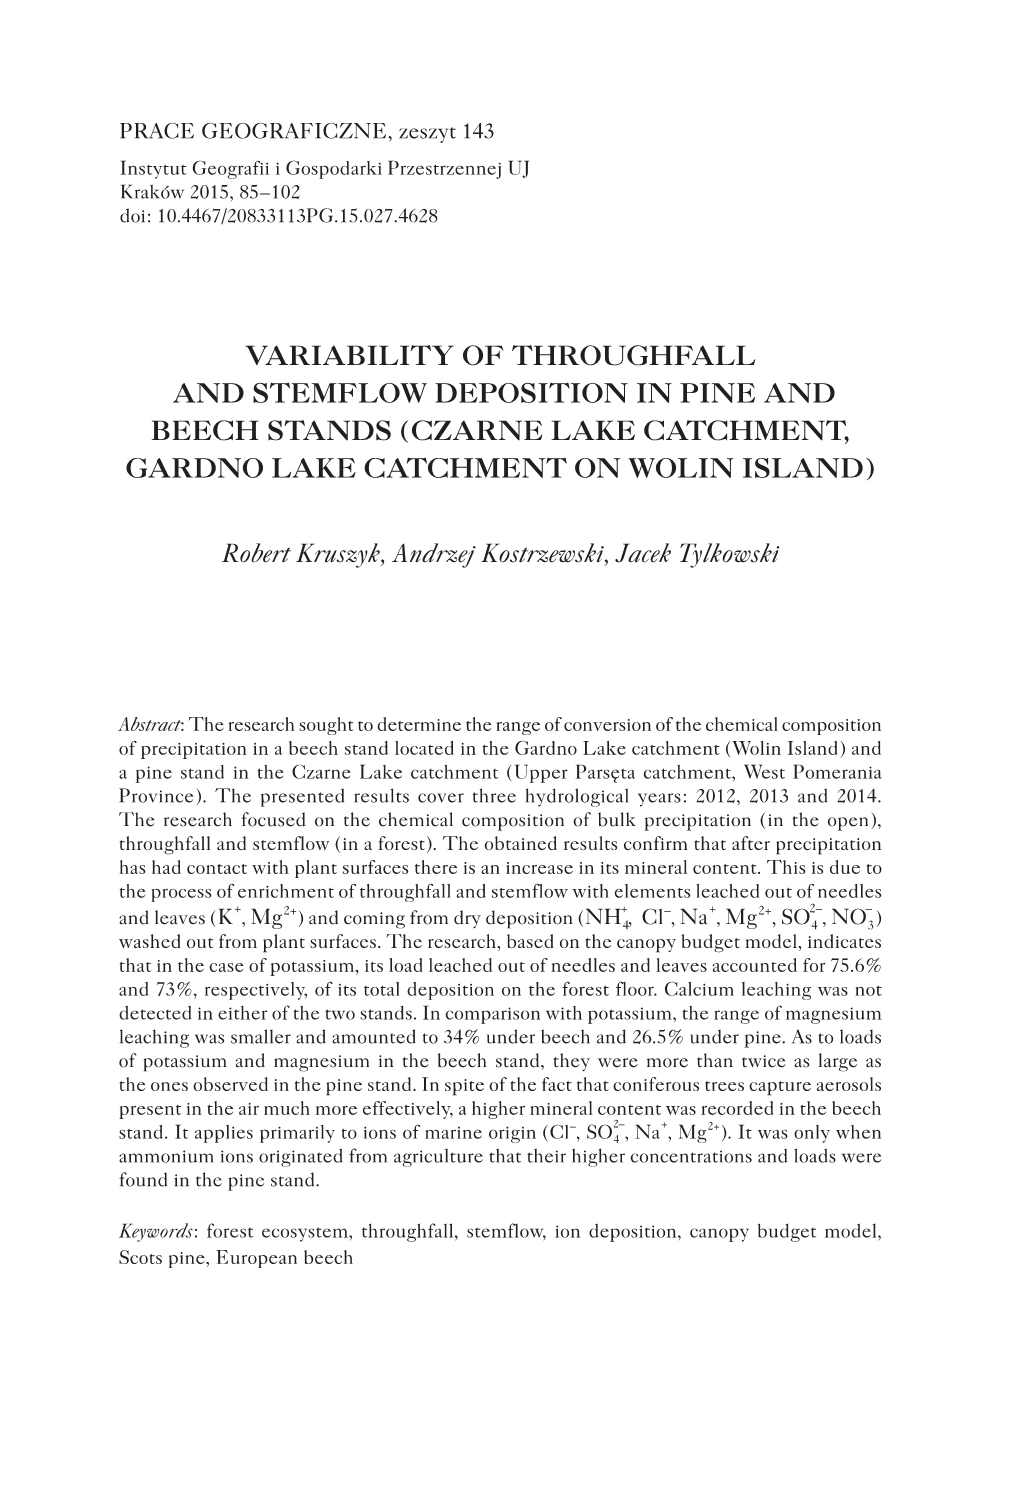 Variability of Throughfall and Stemflow Deposition in Pine and Beech Stands ( Czarne Lake Catchment, Gardno Lake Catchment on Wolin Island )